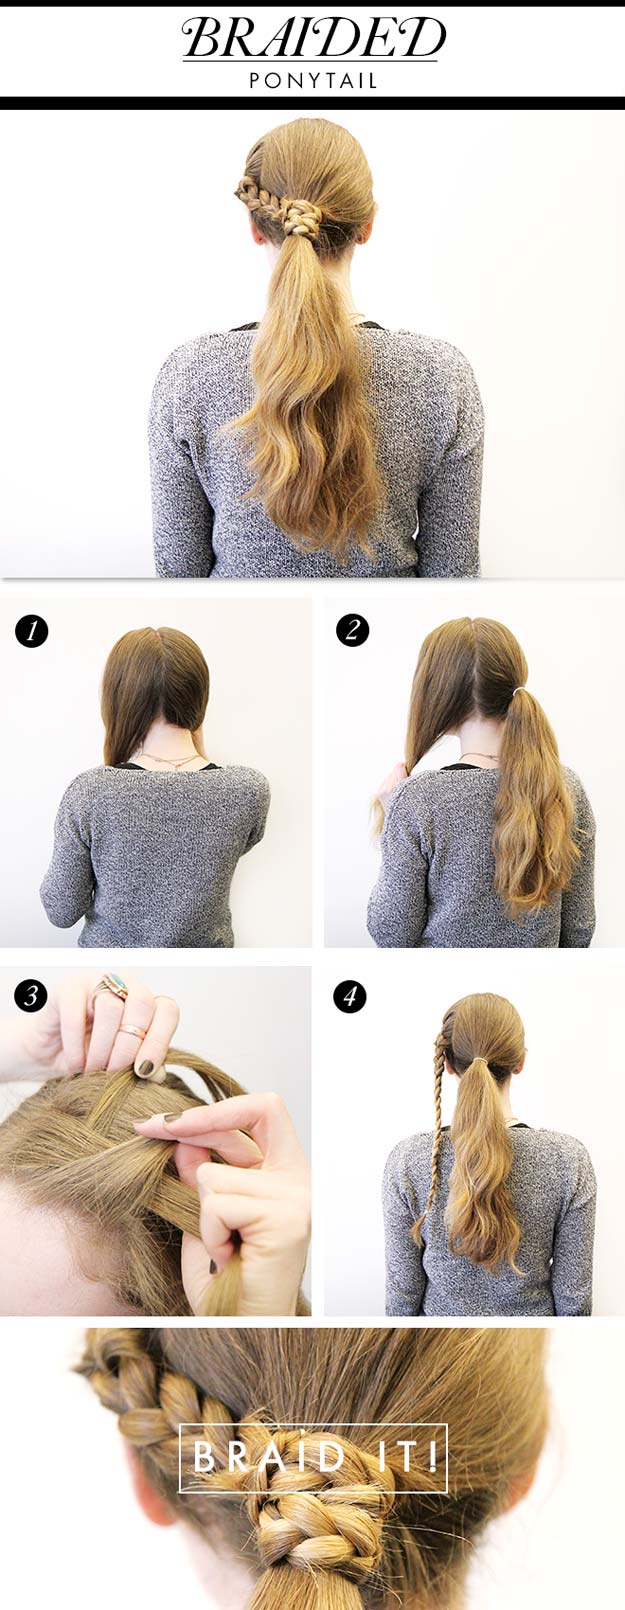 Best Hairstyles for Long Hair - Braided Pony Tail - Step by Step Tutorials for Easy Curls, Updo, Half Up, Braids and Lazy Girl Looks. Prom Ideas, Special Occasion Hair and Braiding Instructions for Teens, Teenagers and Adults, Women and Girls 